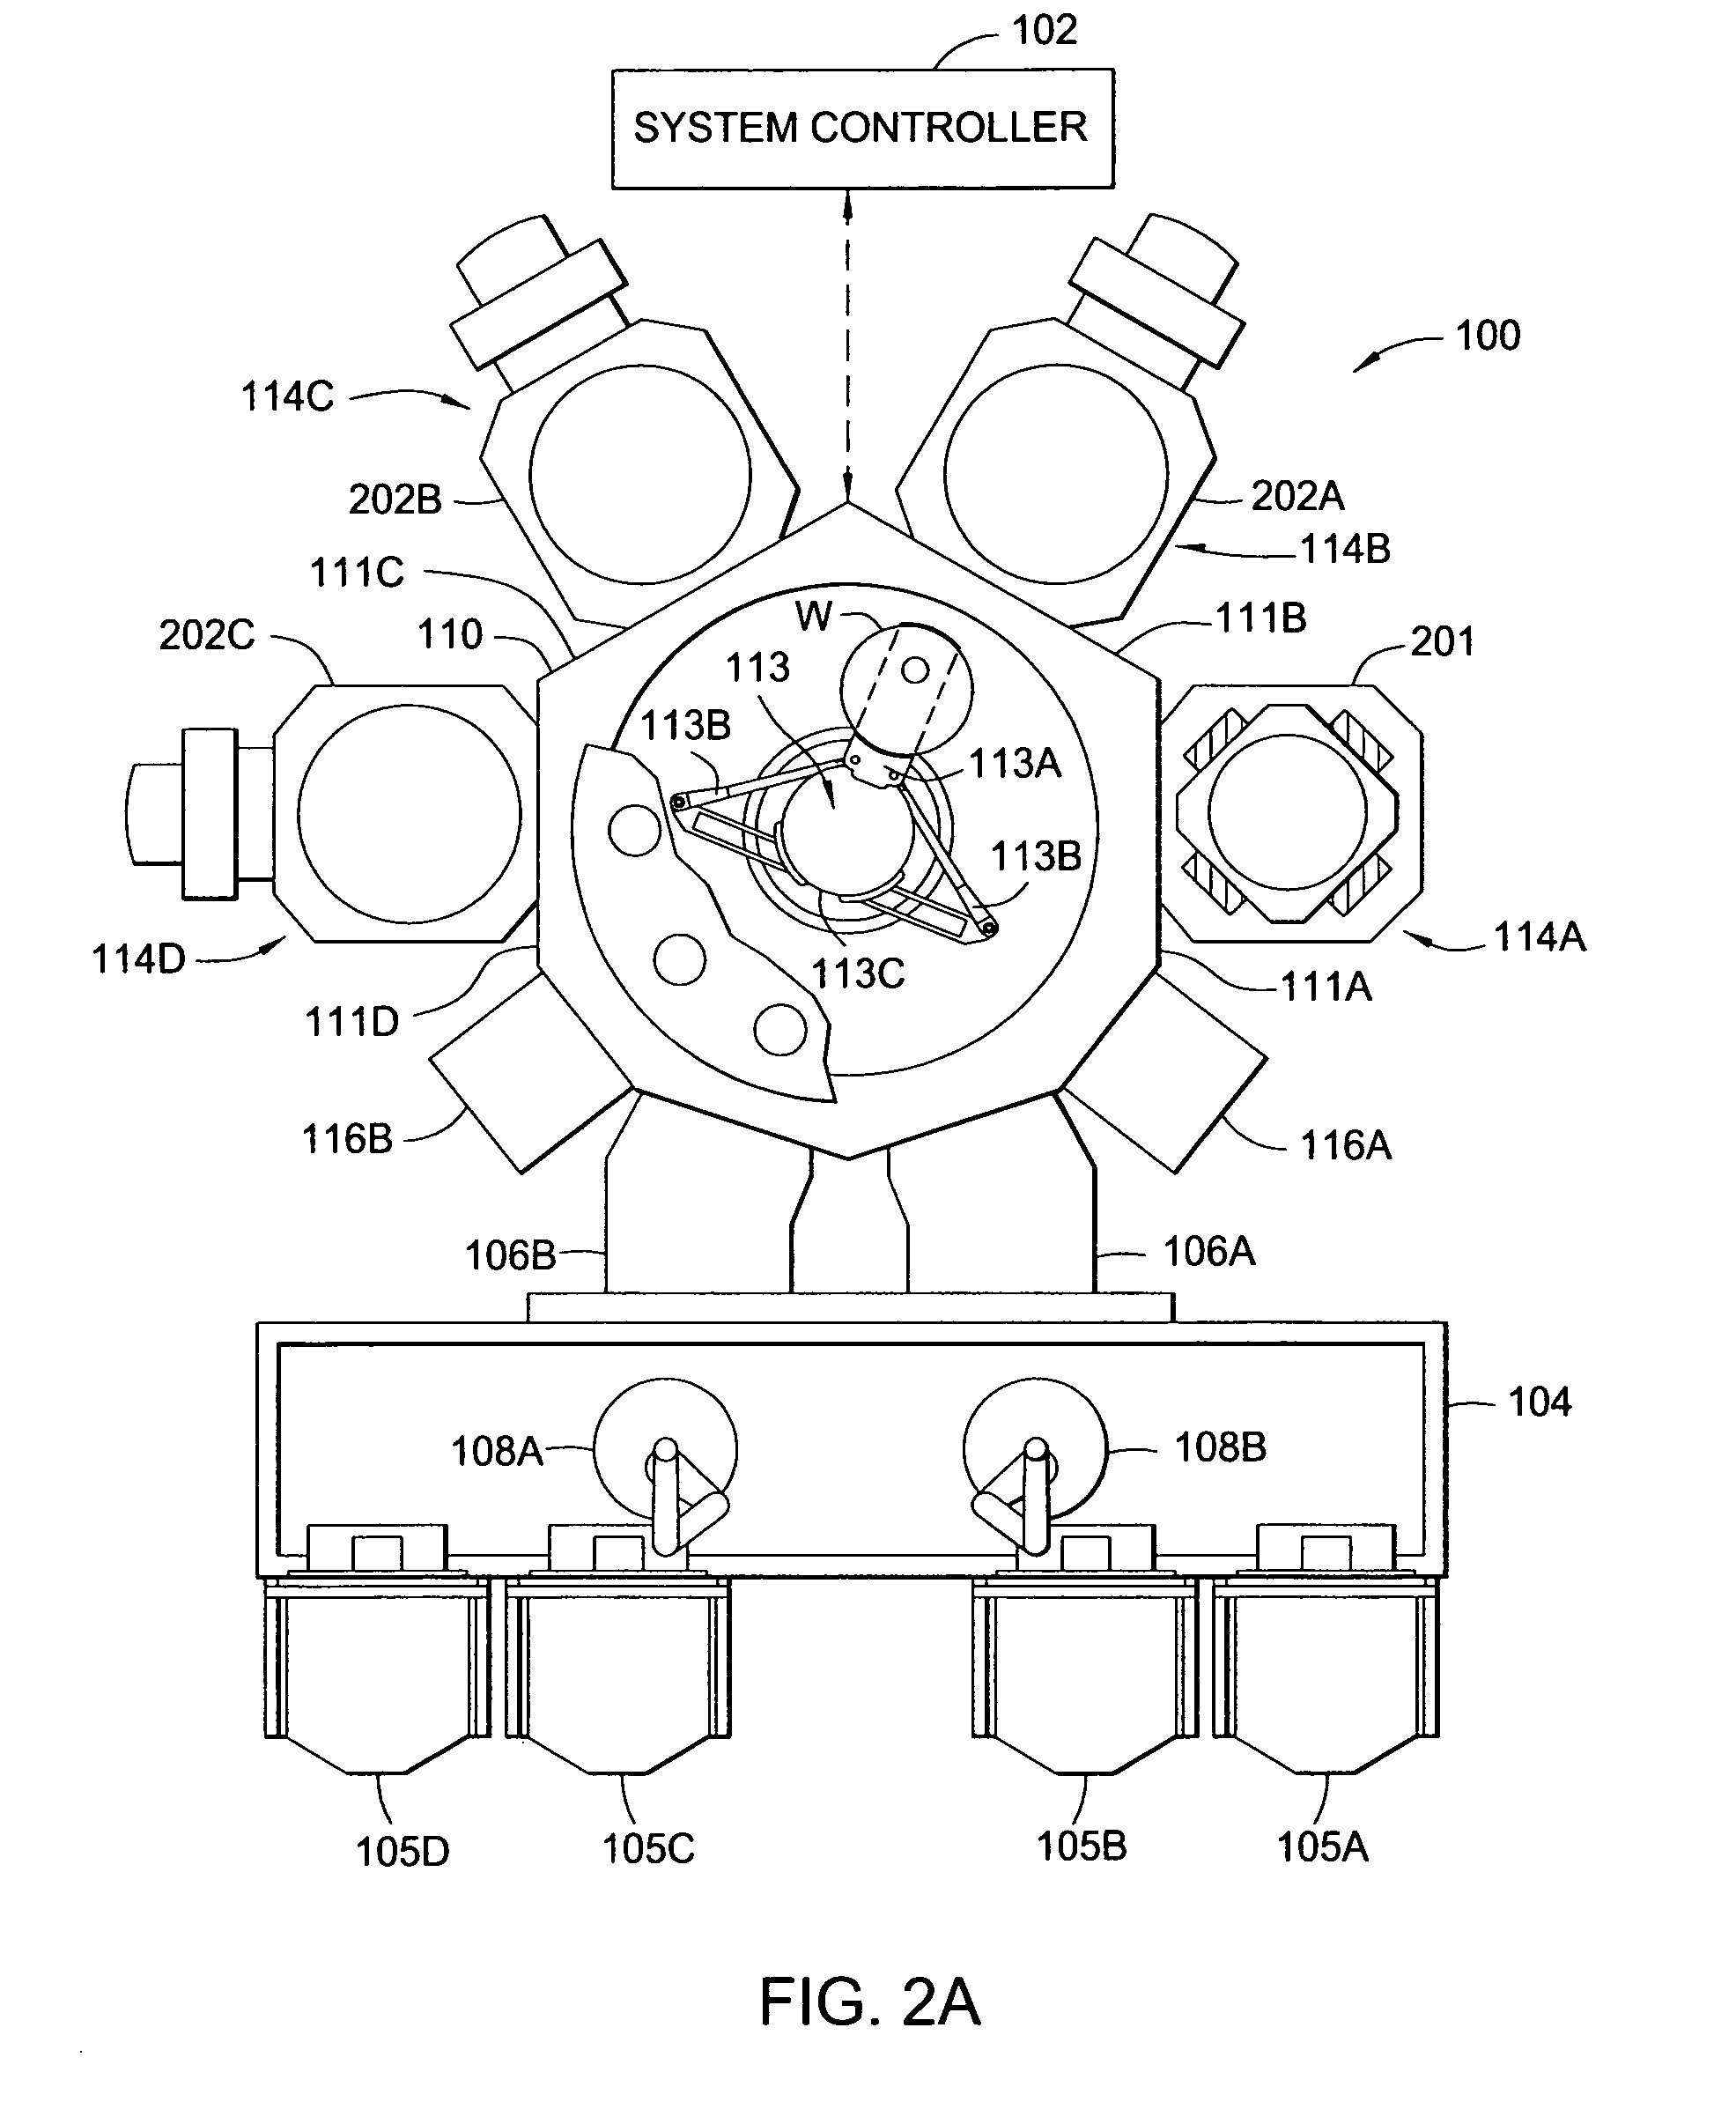 Substrate processing apparatus using a batch processing chamber